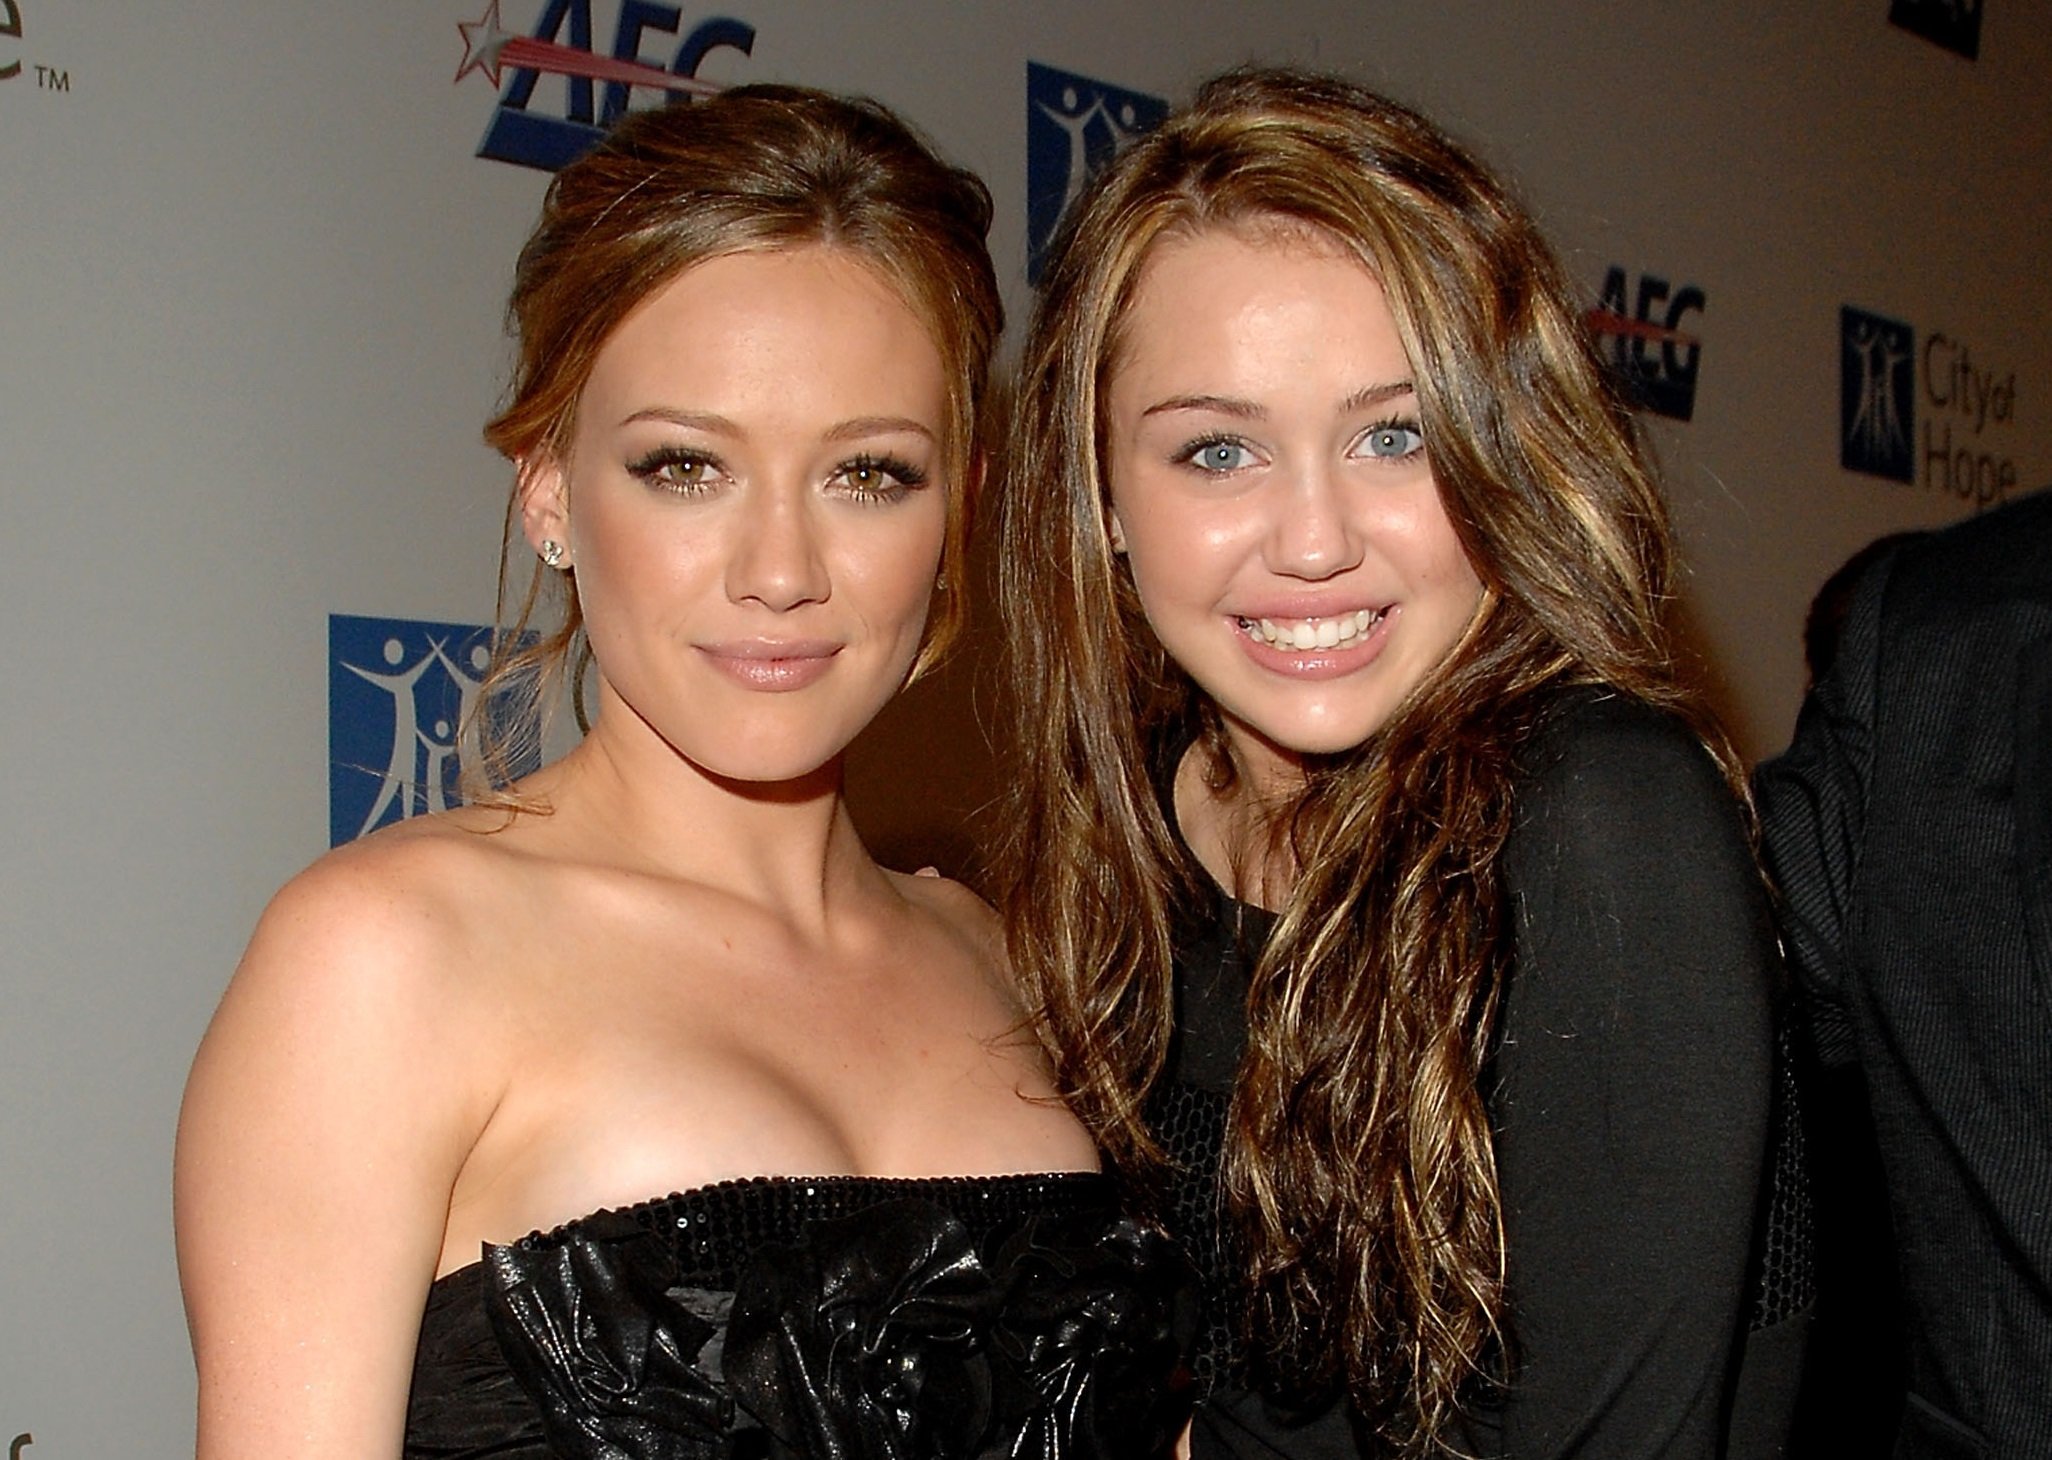 Hilary Duff and Miley Cyrus arrive at the '2007 Spirit Of Life Awards' on September 27, 2007 in West Hollywood, California.